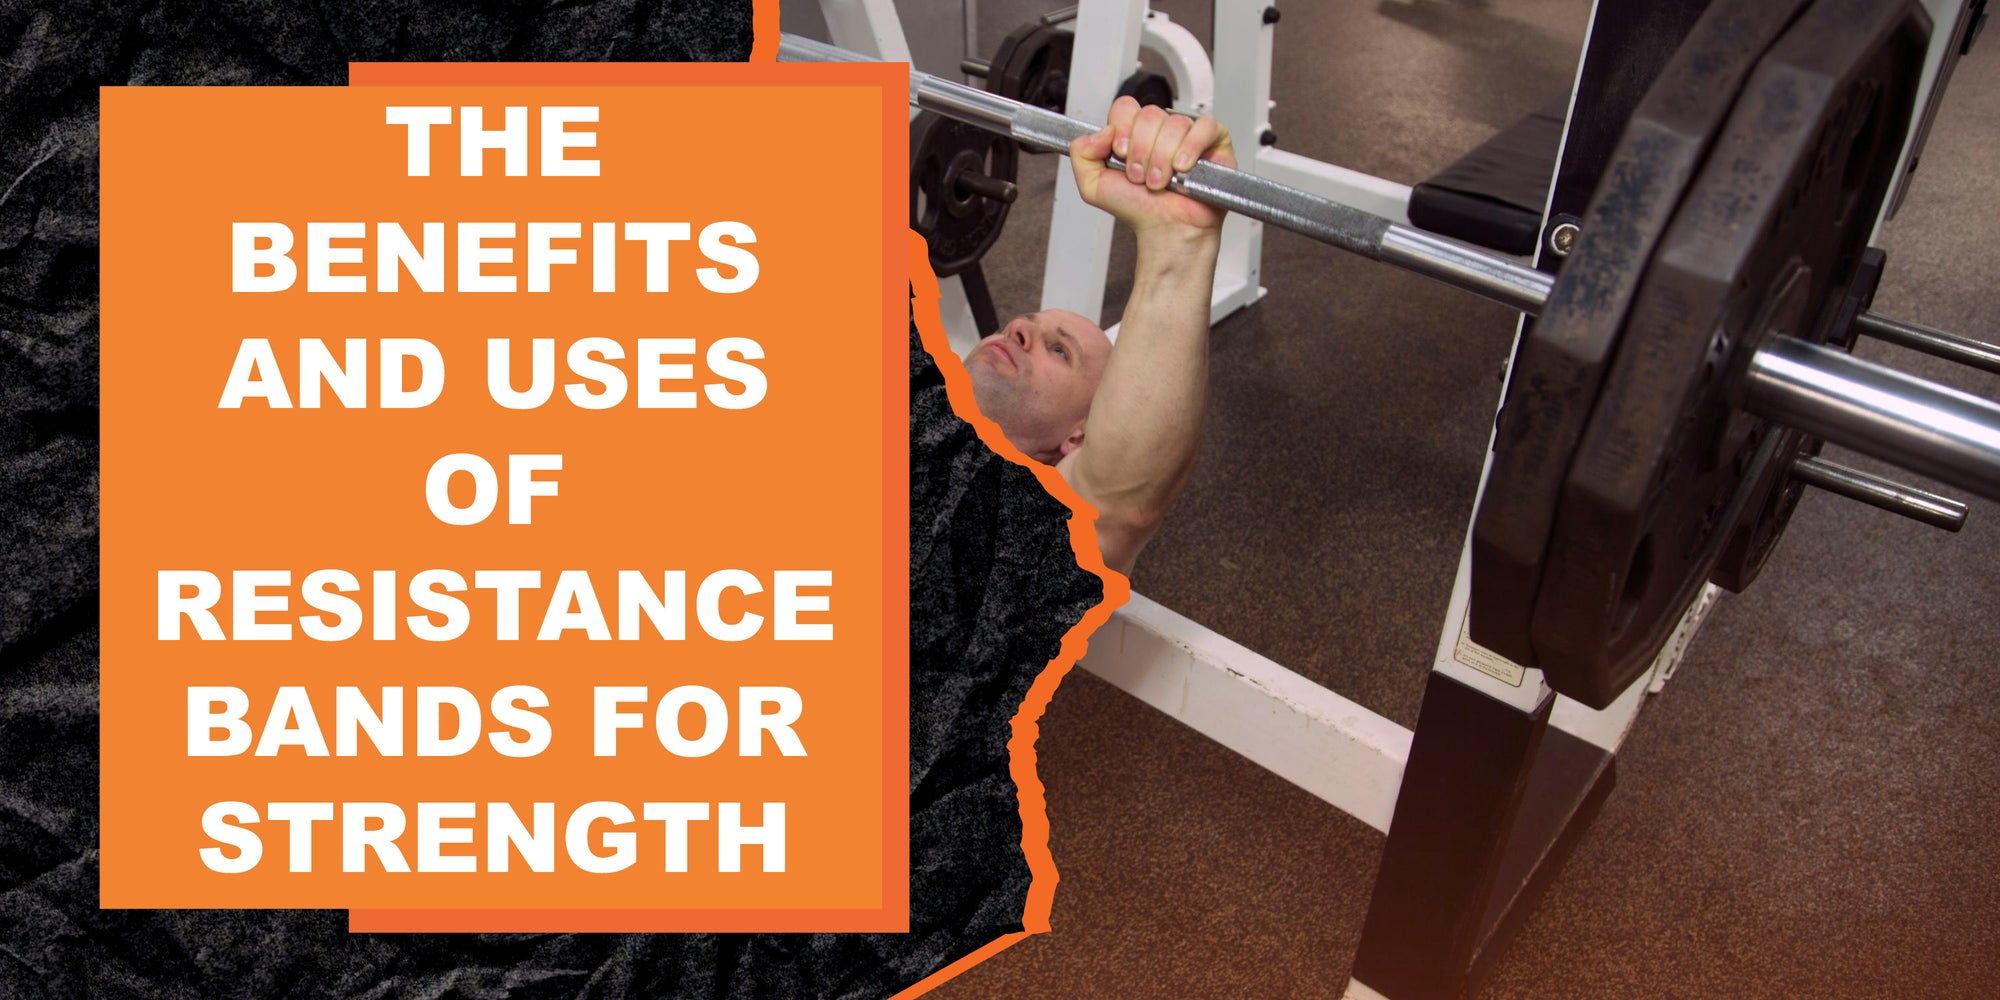 The Benefits and Uses of Resistance Bands for Strength Training